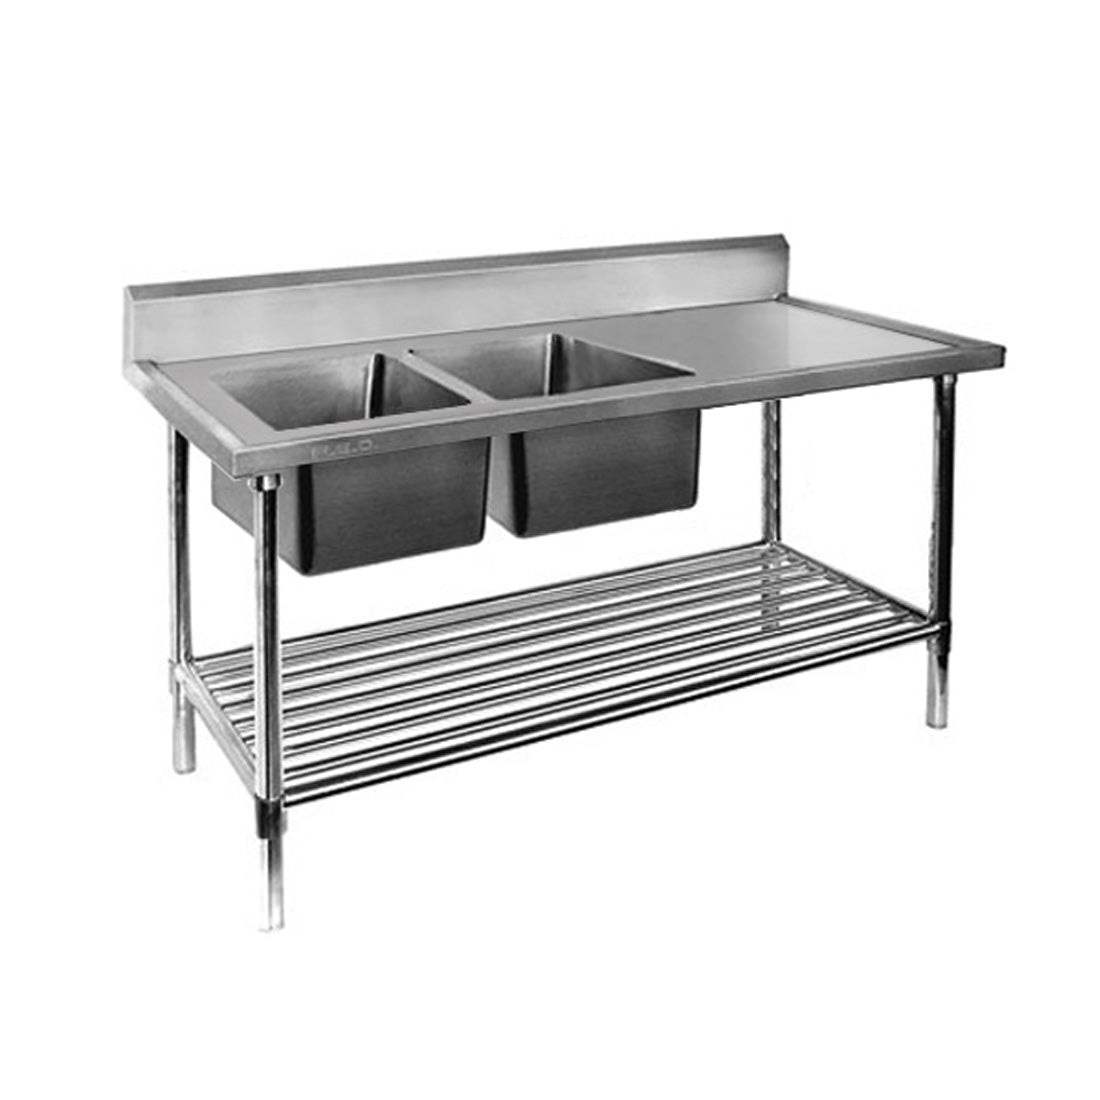 Modular Systems Double Left Sink Bench with Pot Undershelf 2400x700x900 DSB7-2400L/A